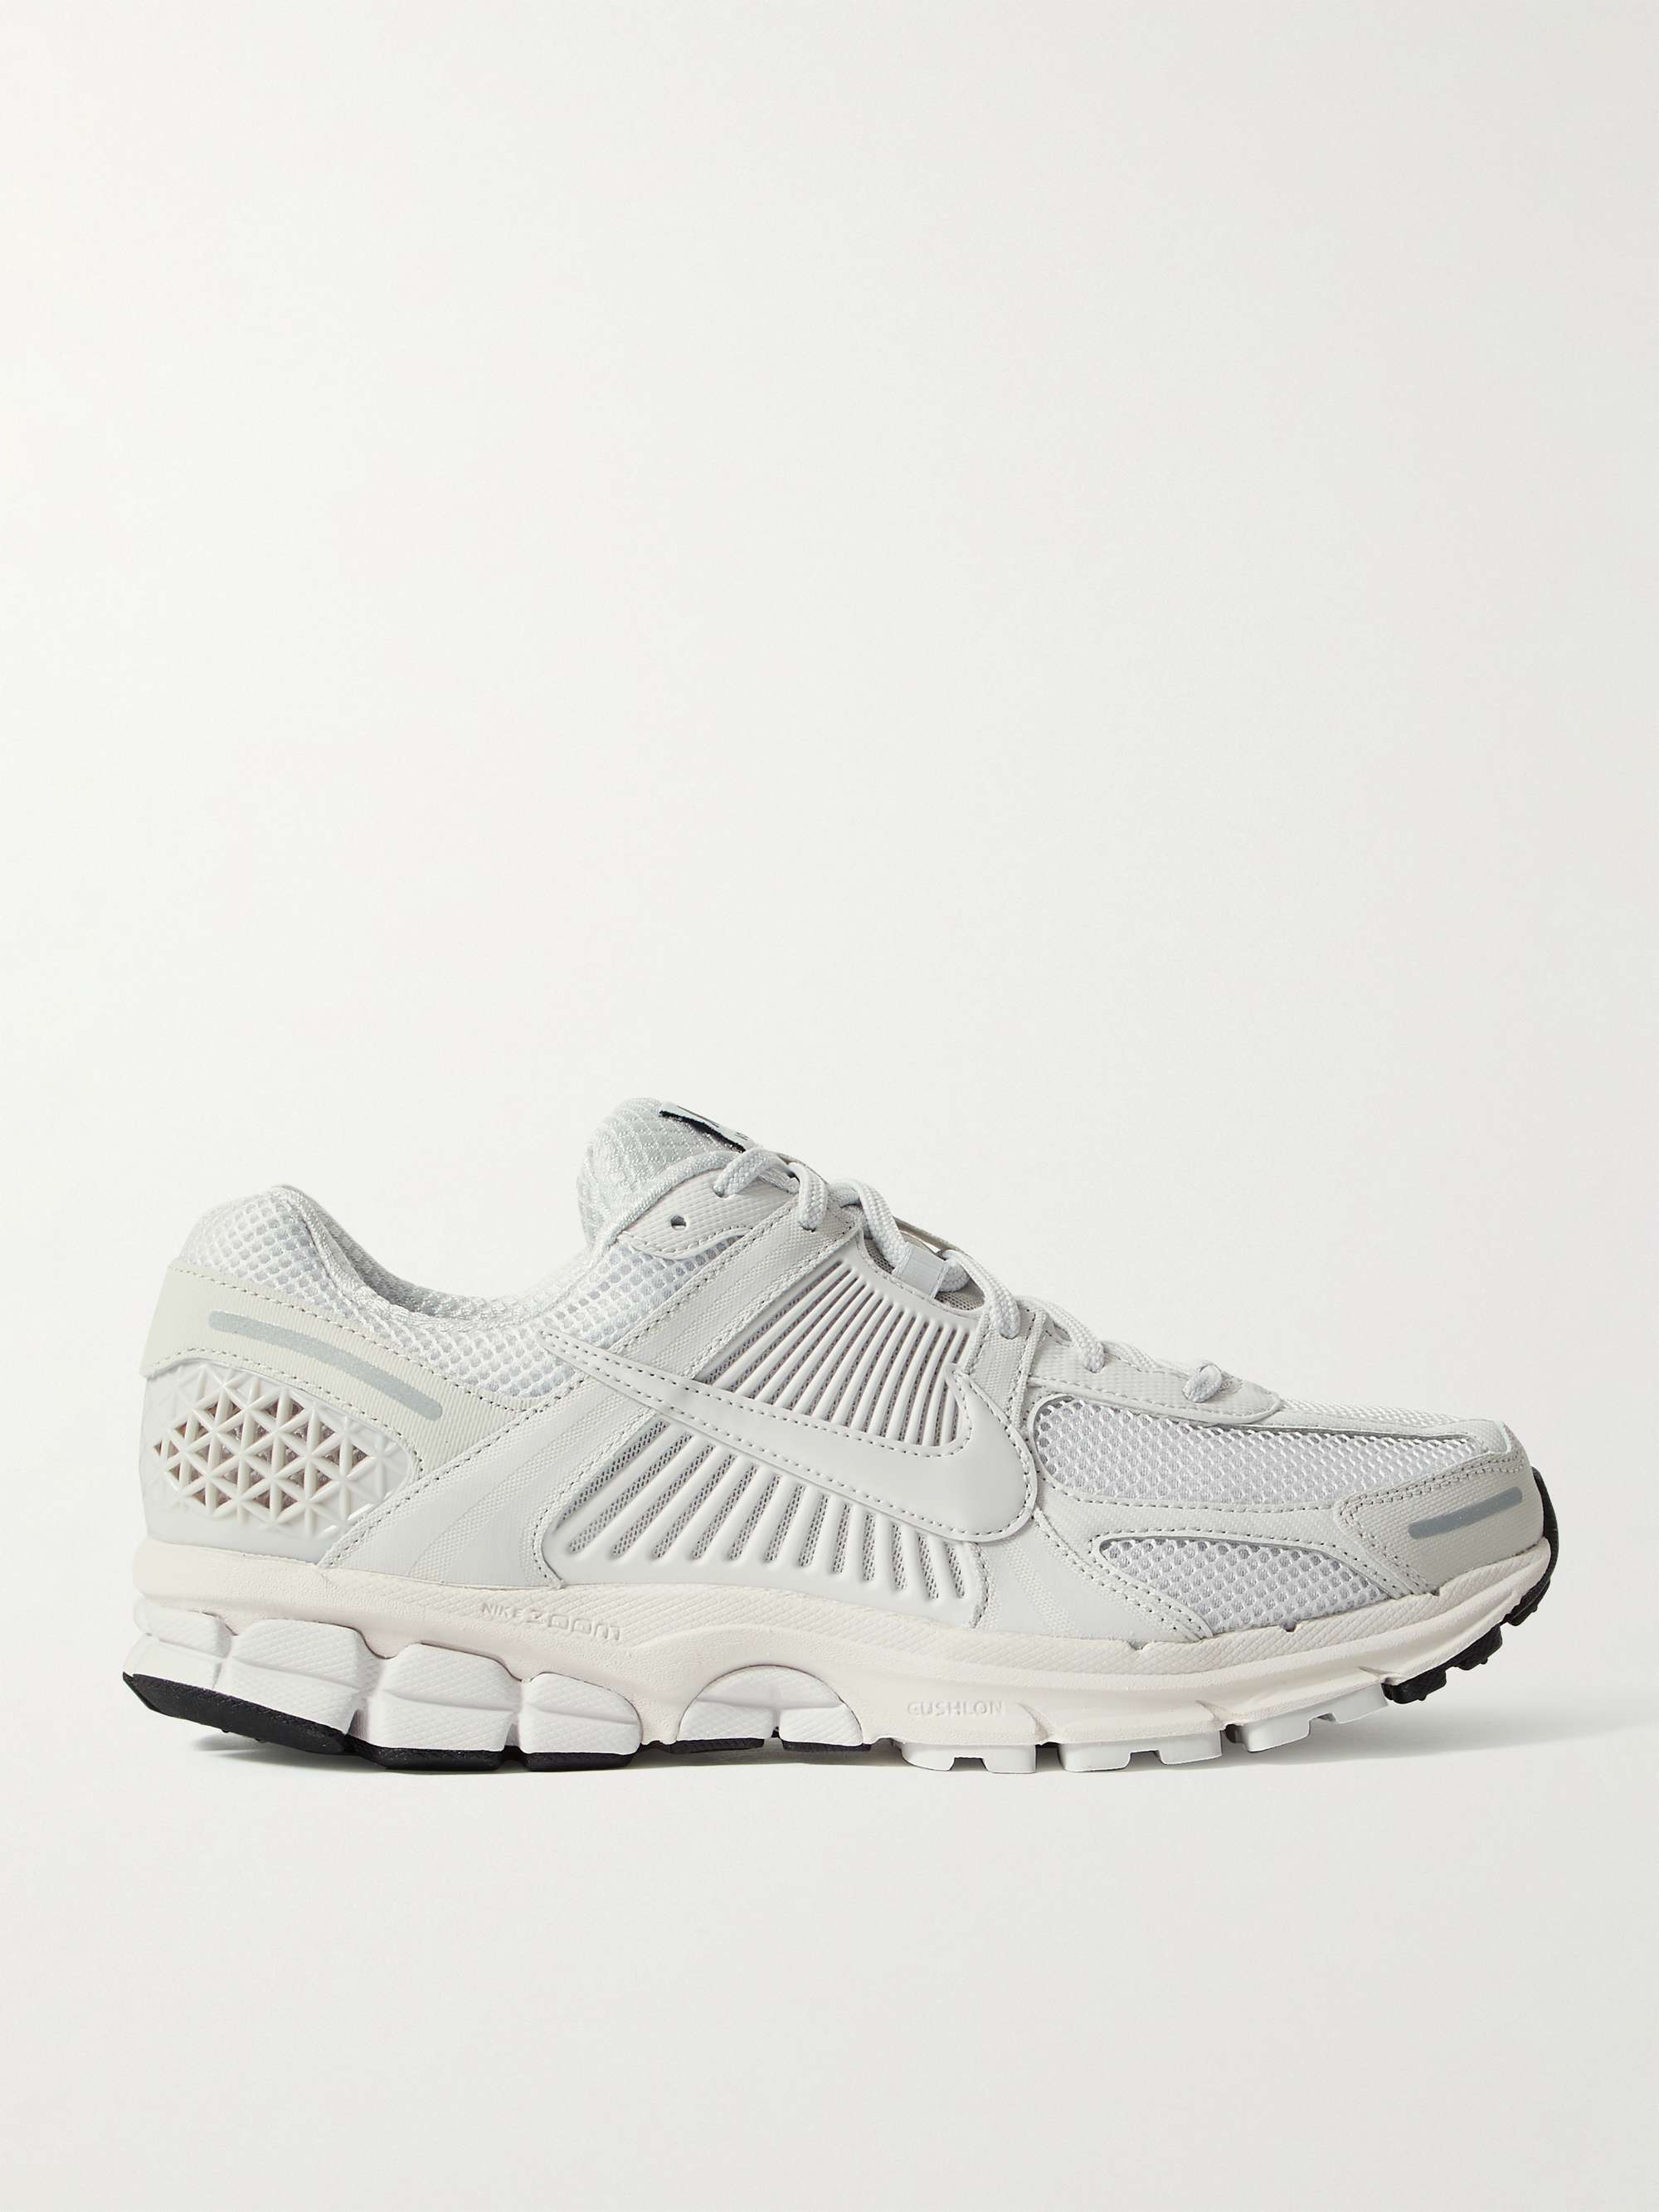 NIKE Zoom Vomero 5 and Leather Sneakers MR PORTER